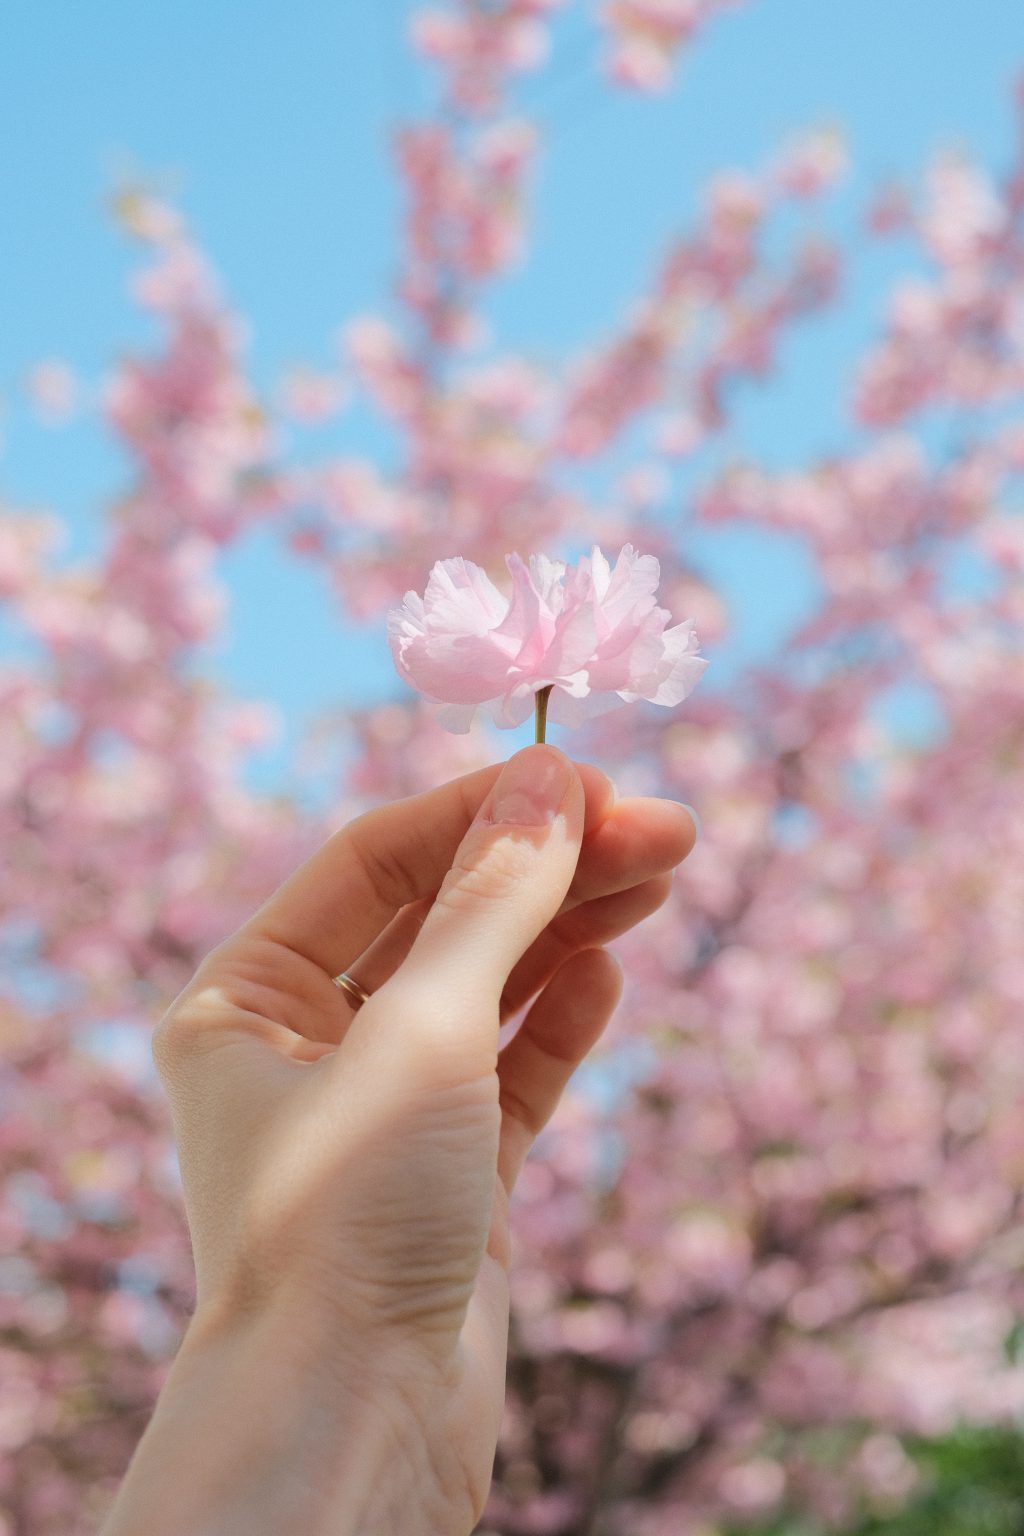 Cherry tree flower in a female hand - free stock photo